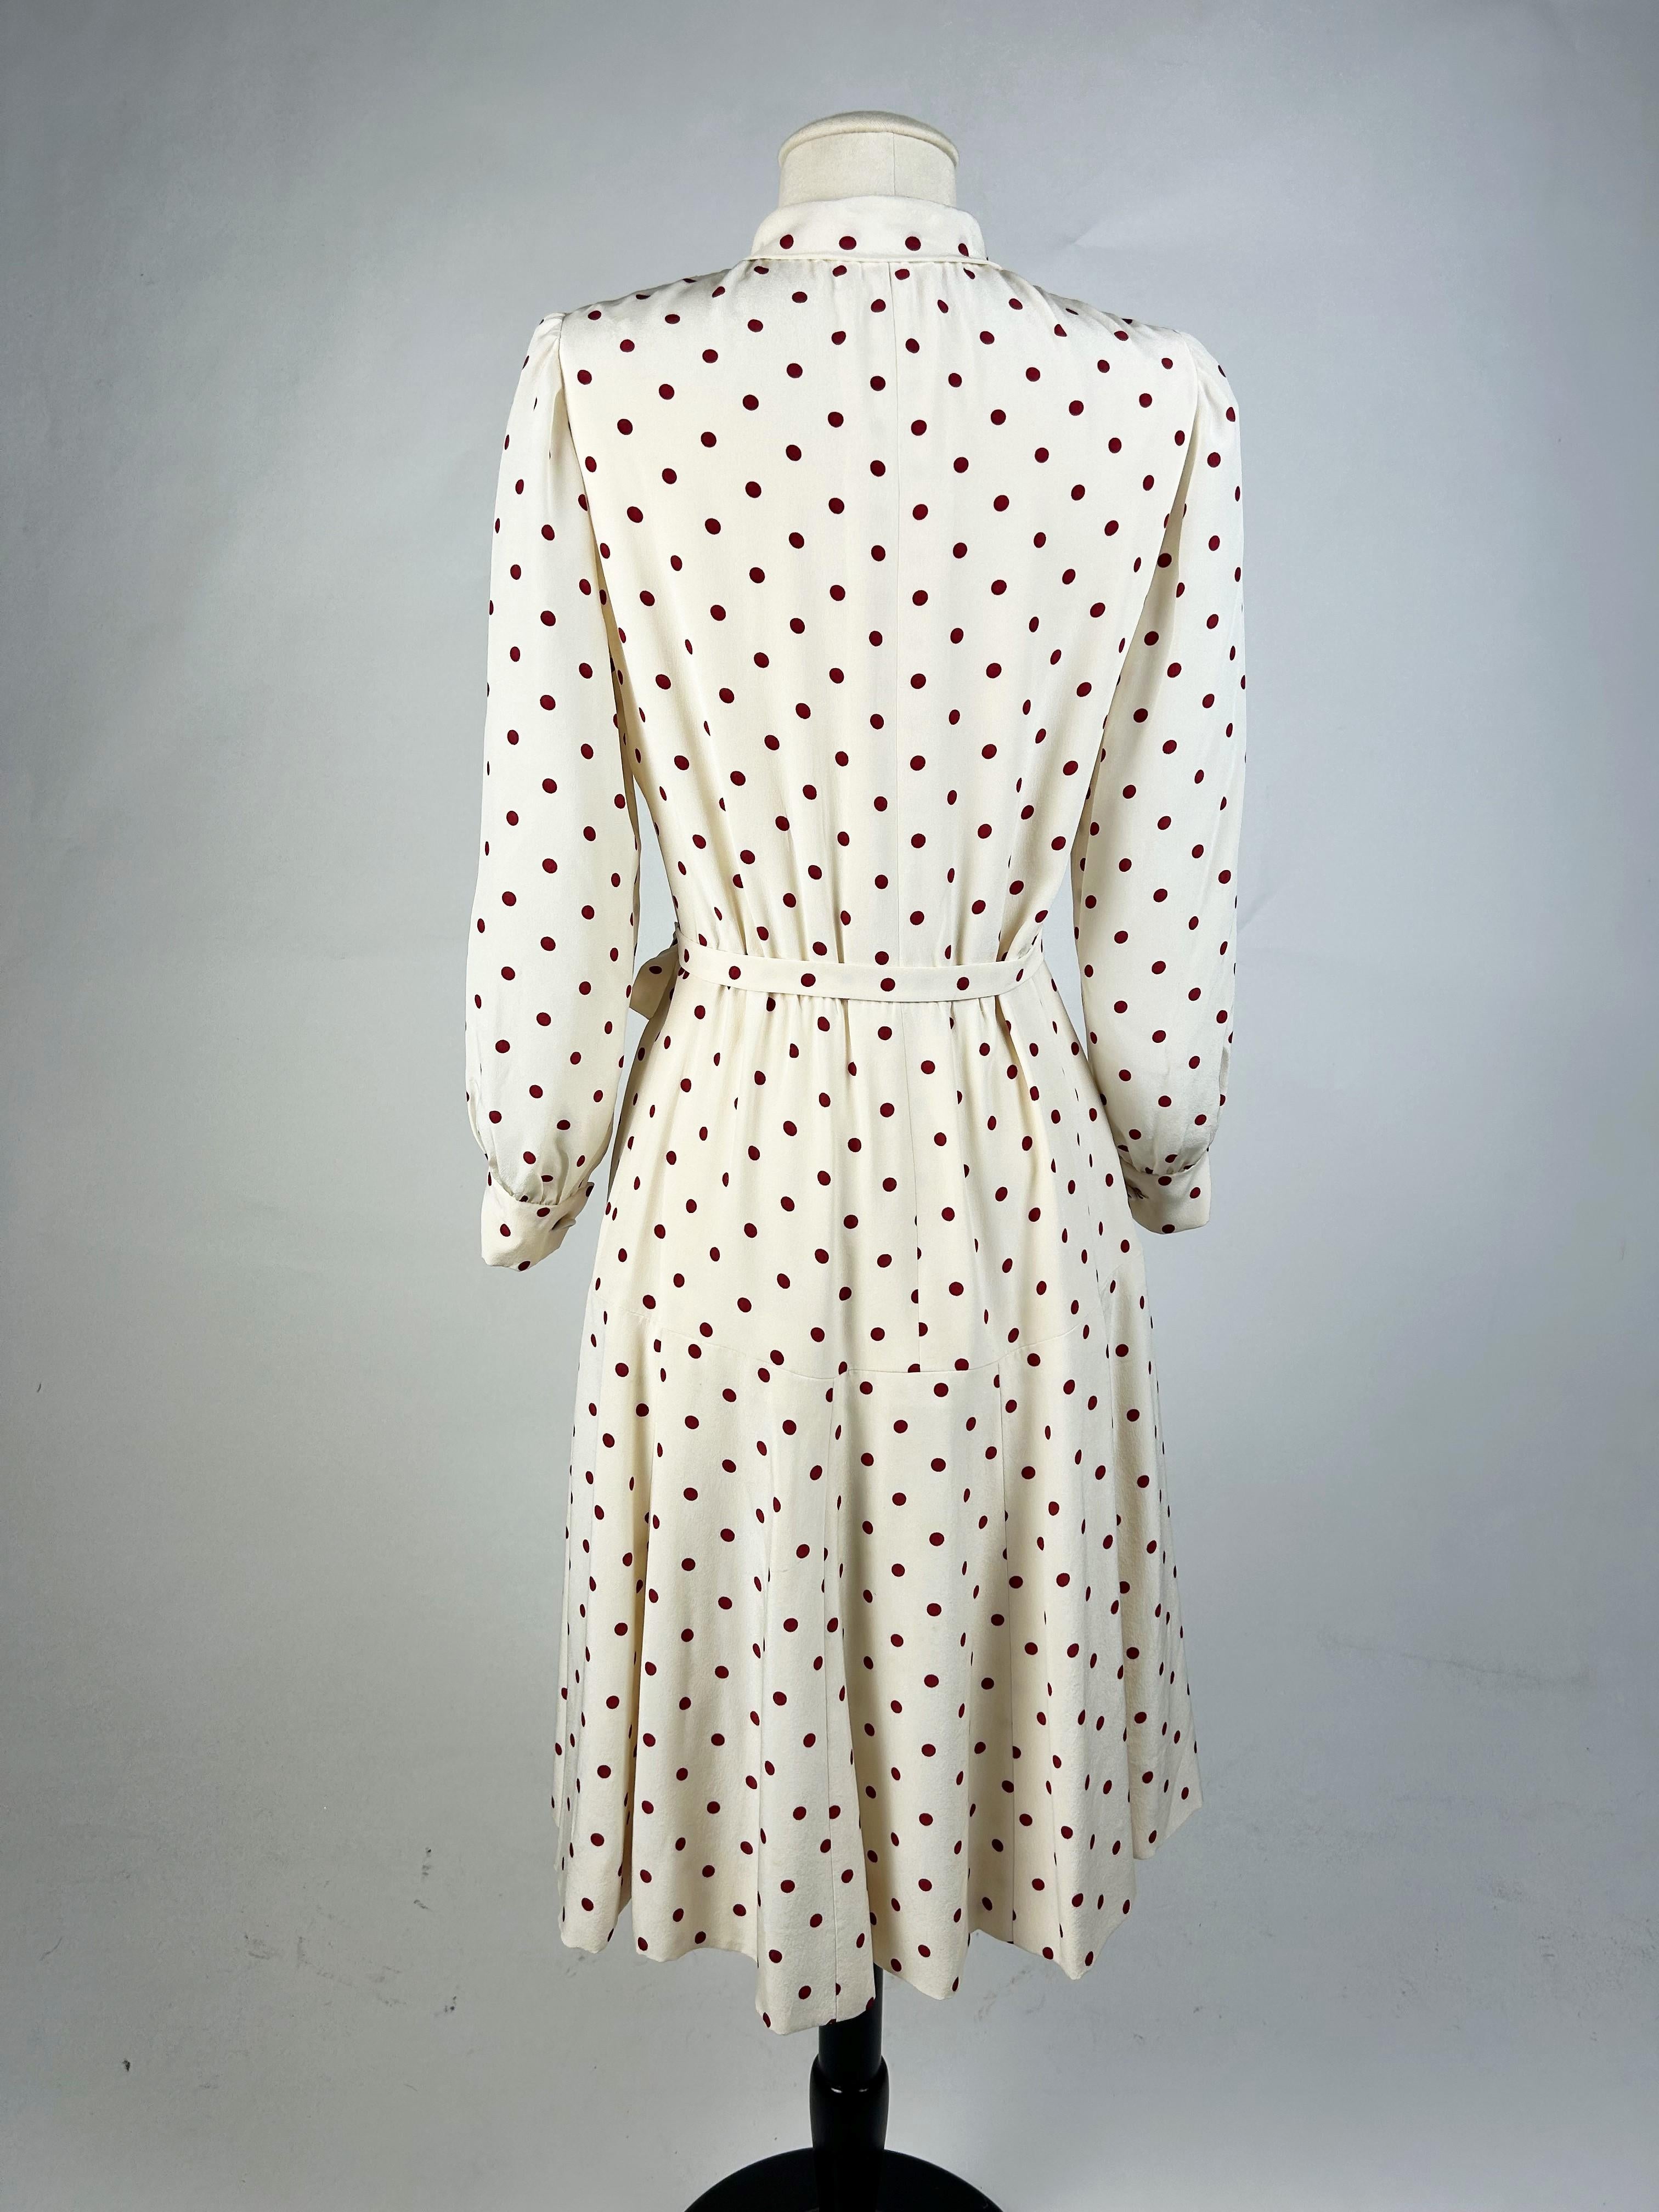 A Polka Dots crepe cocktail dress by Chanel Haute Couture numbered 59644 C. 1975 For Sale 8